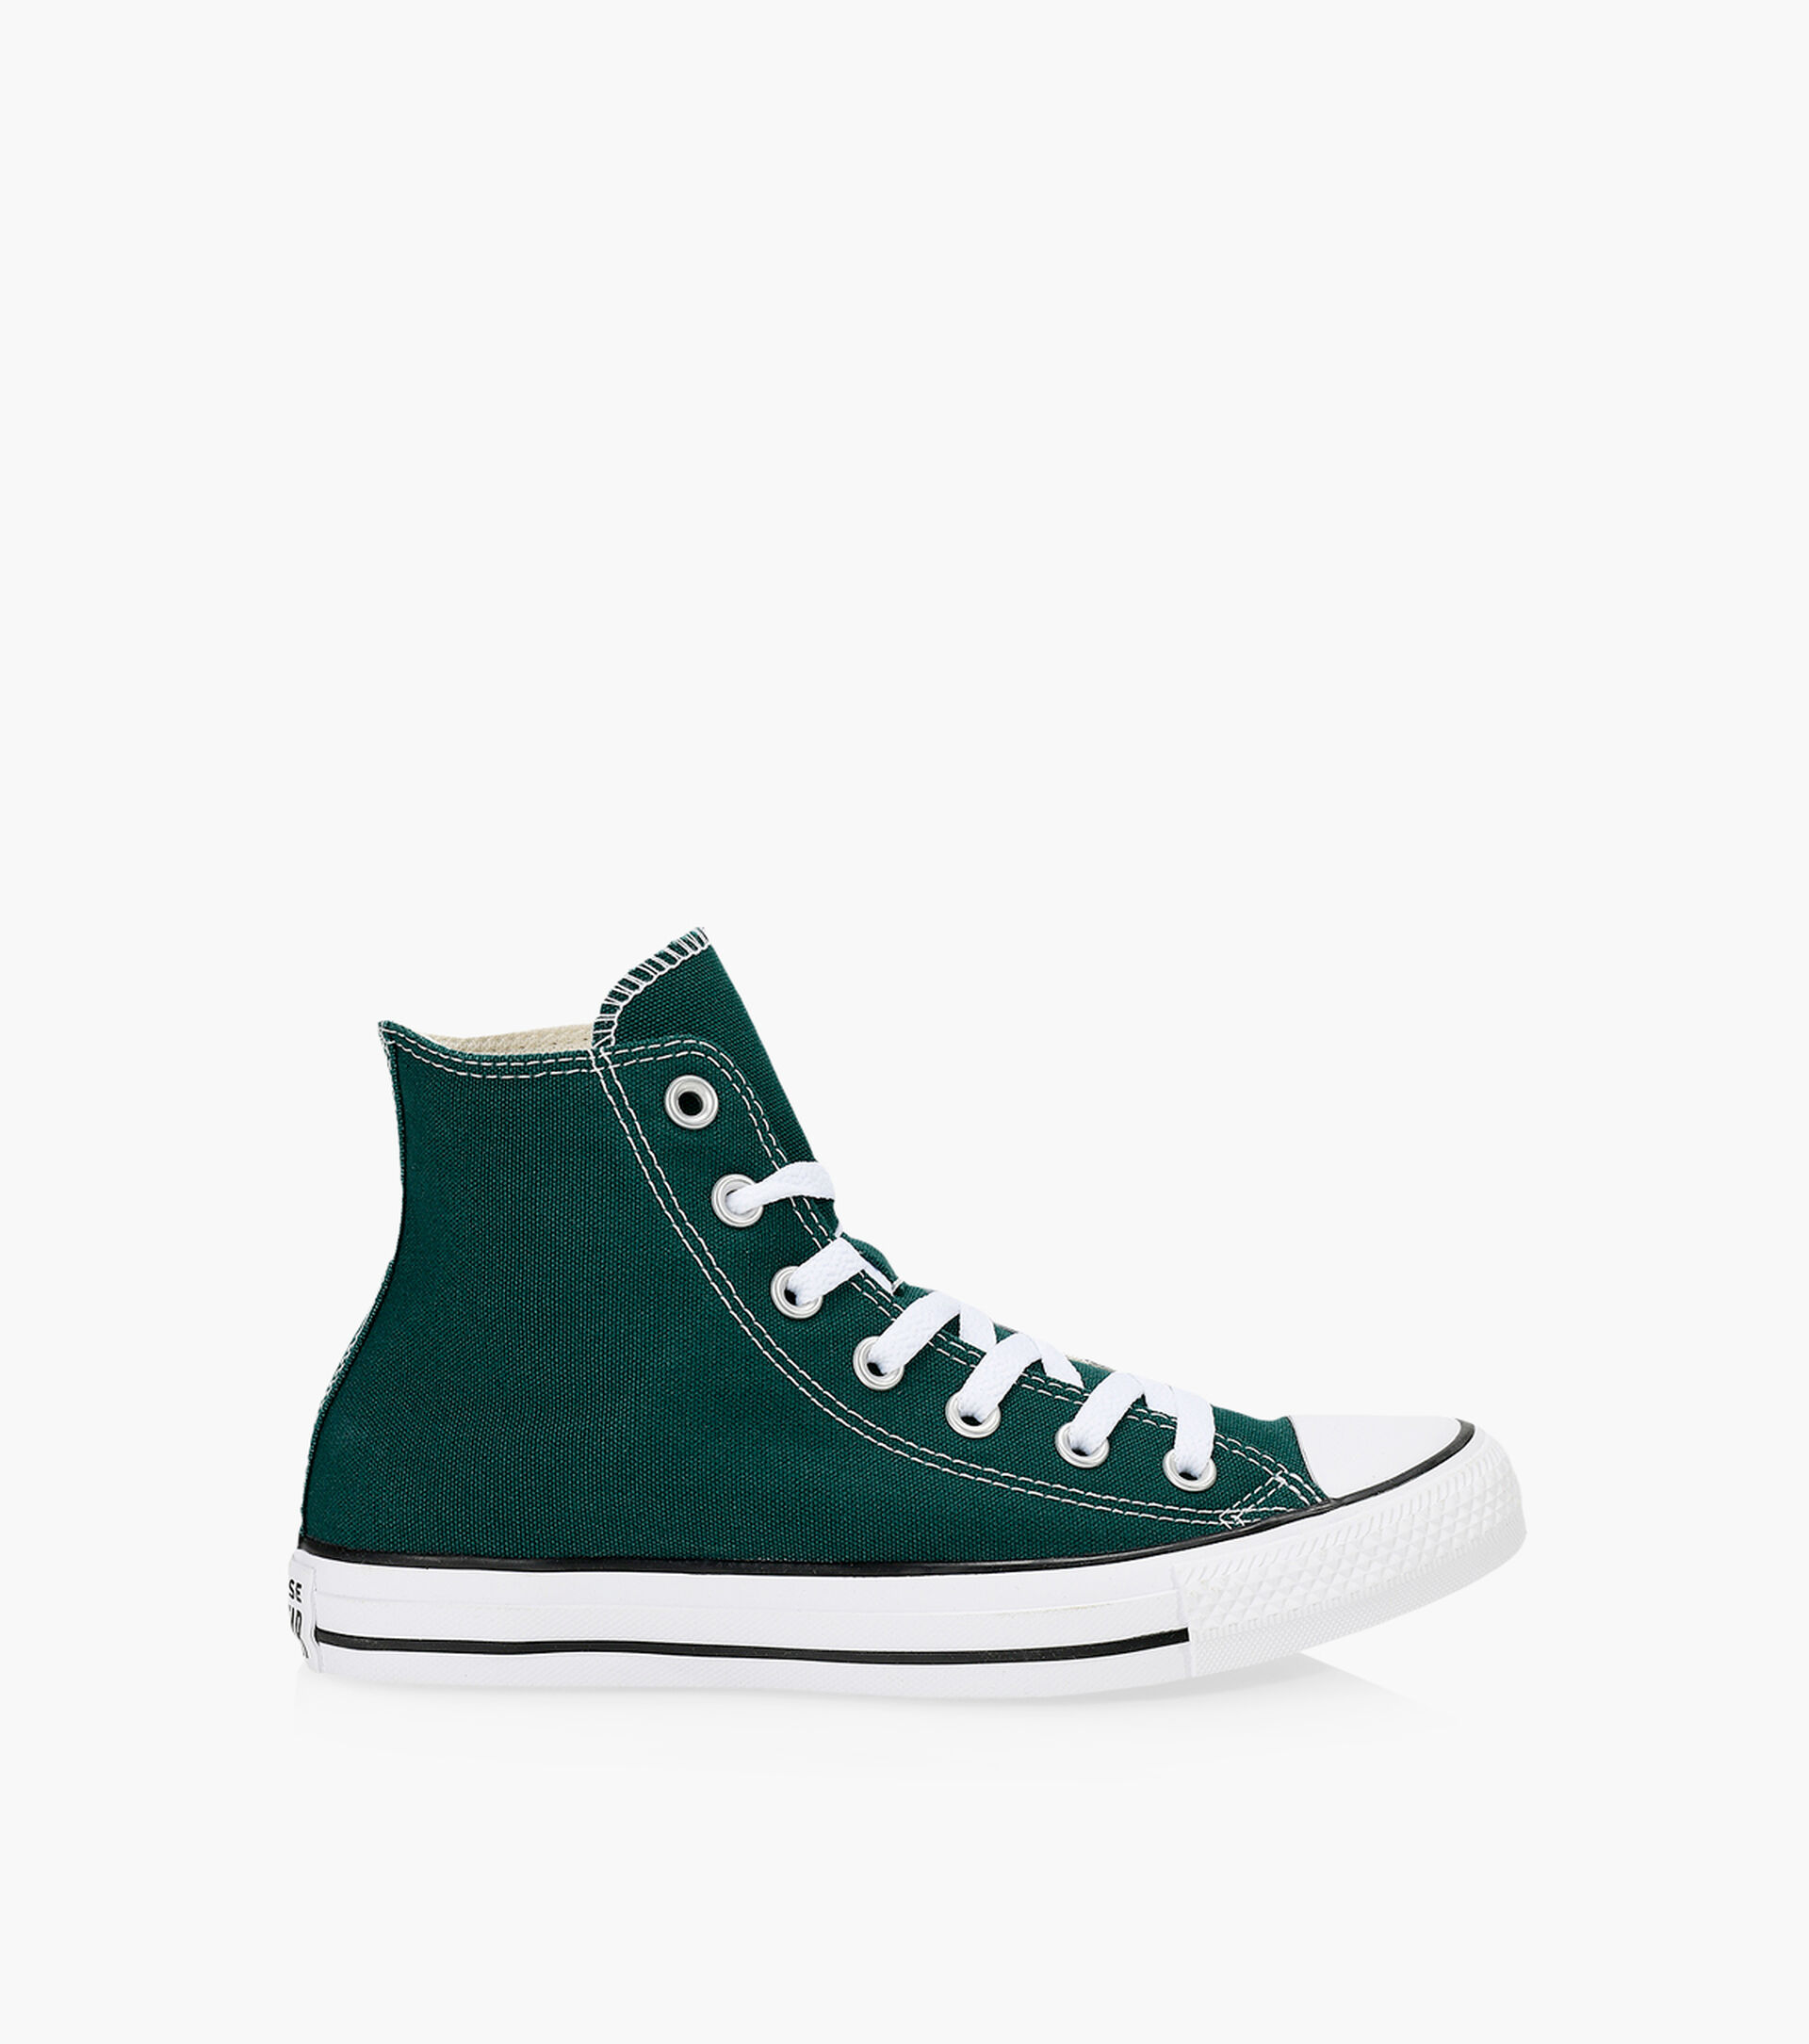 CONVERSE CHUCK TAYLOR ALL STAR CORE HI - Fabric | Browns Shoes